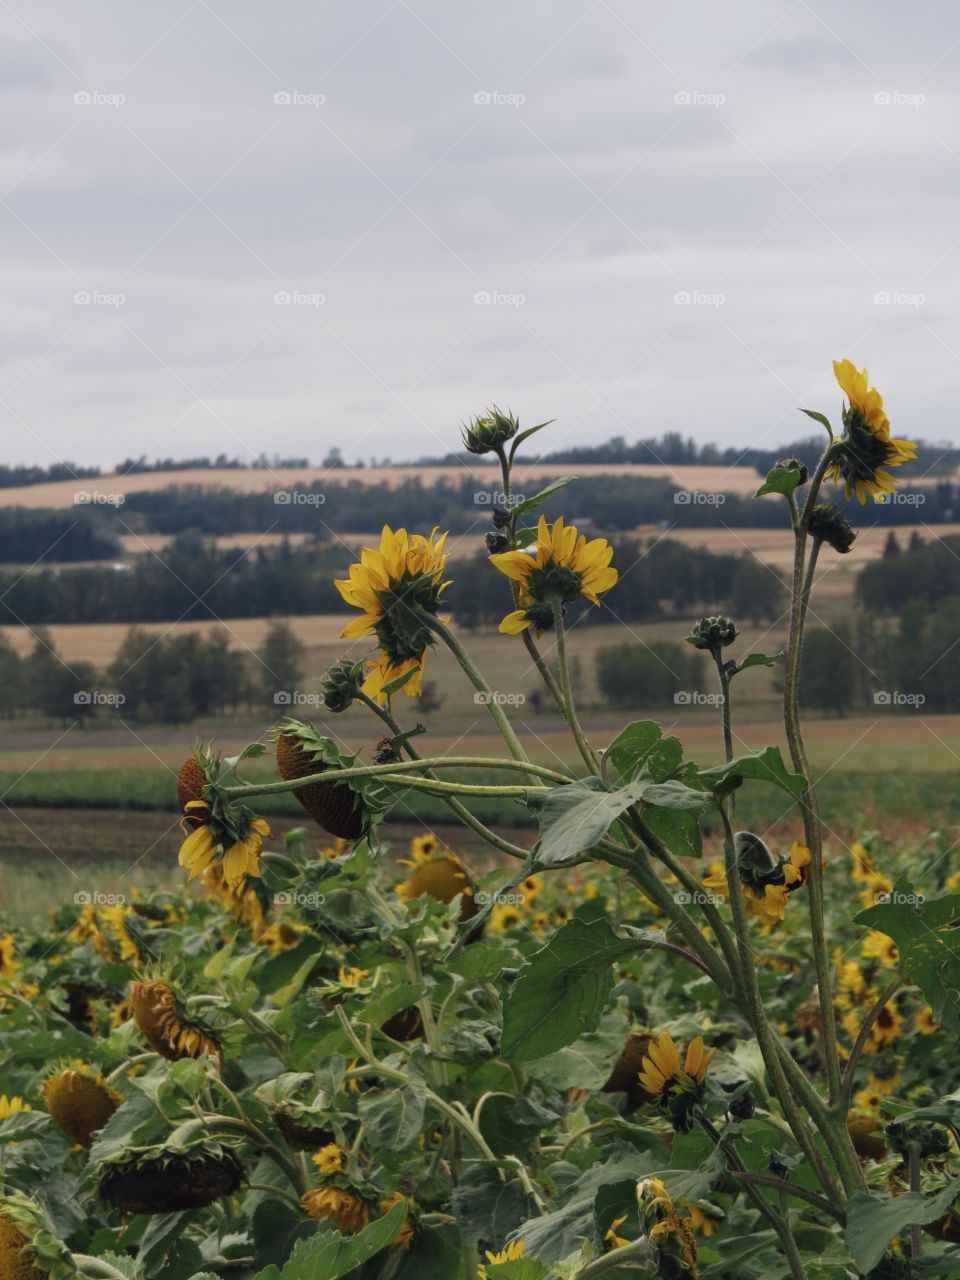 Some tall sunflowers at the sunmaze, Bowden AB